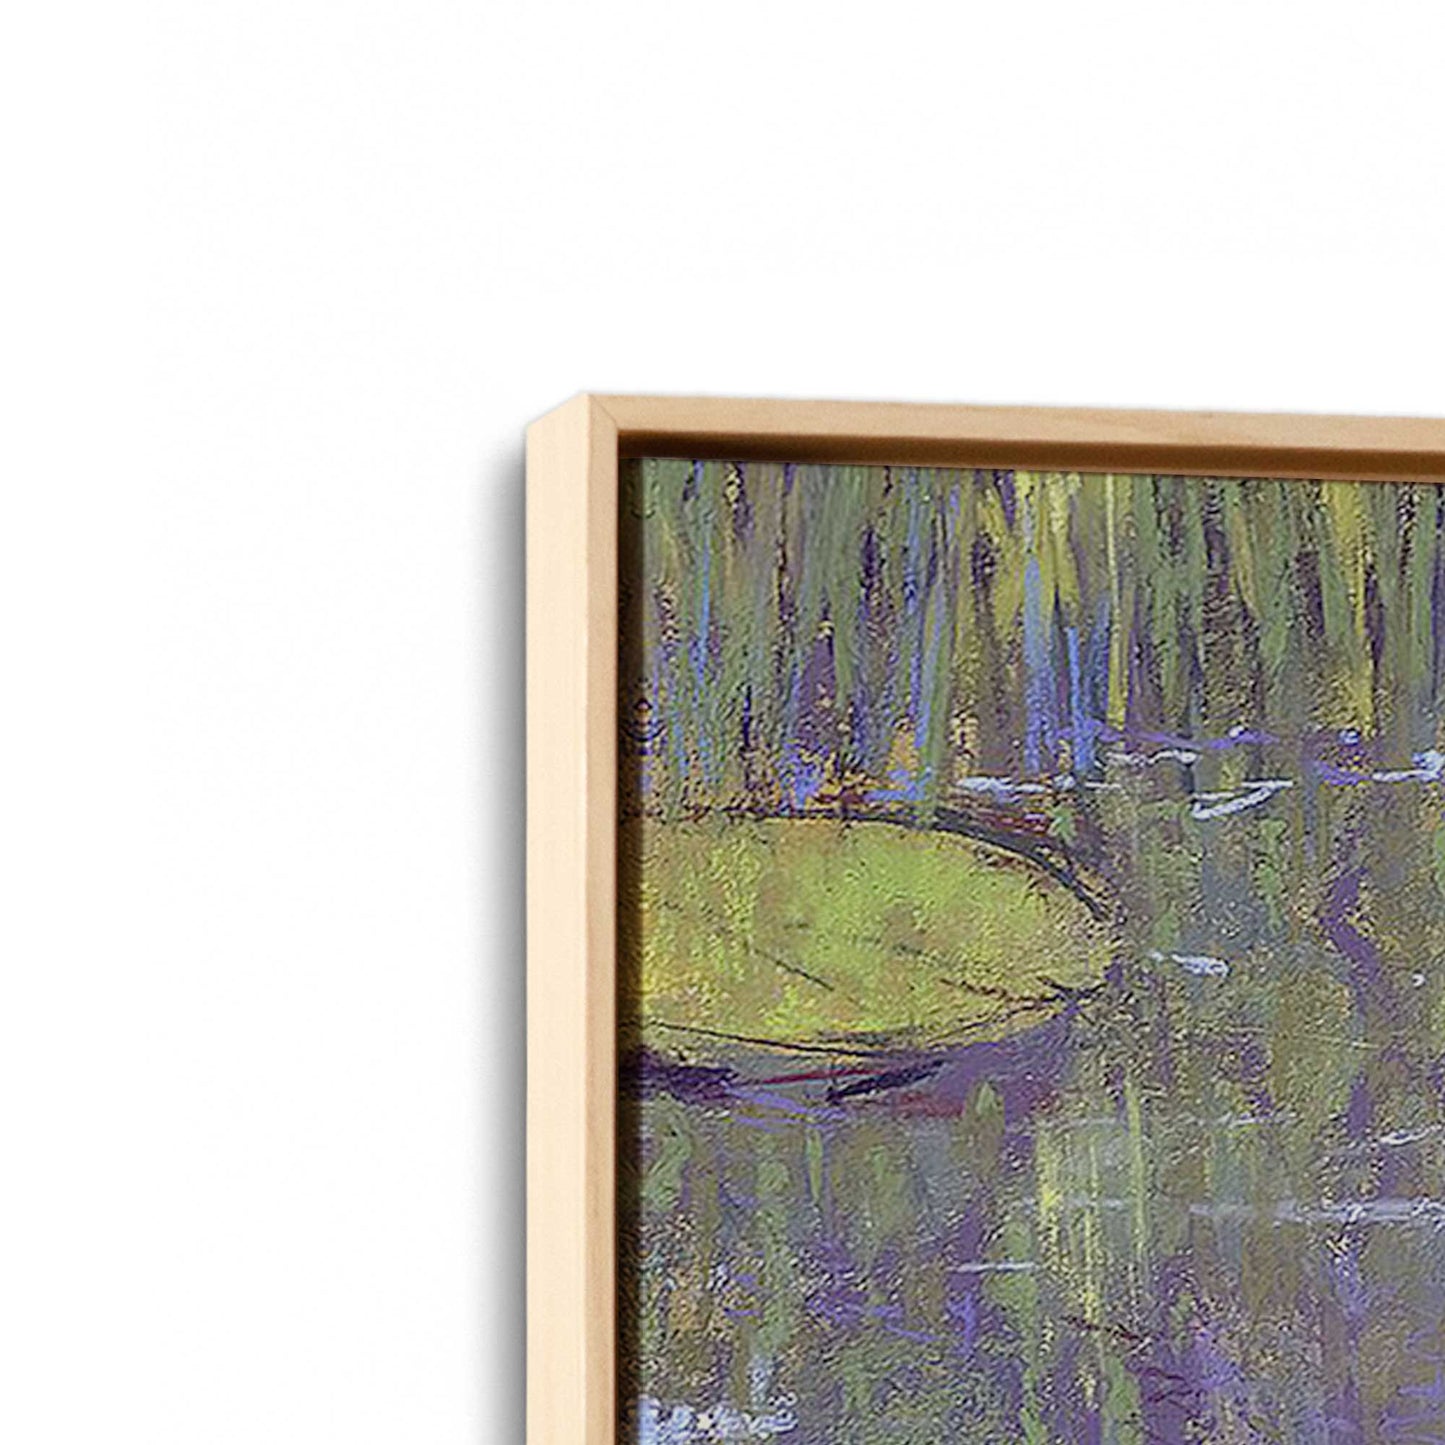 [Color:American Maple], Picture of art in a American Maple frame at an angle